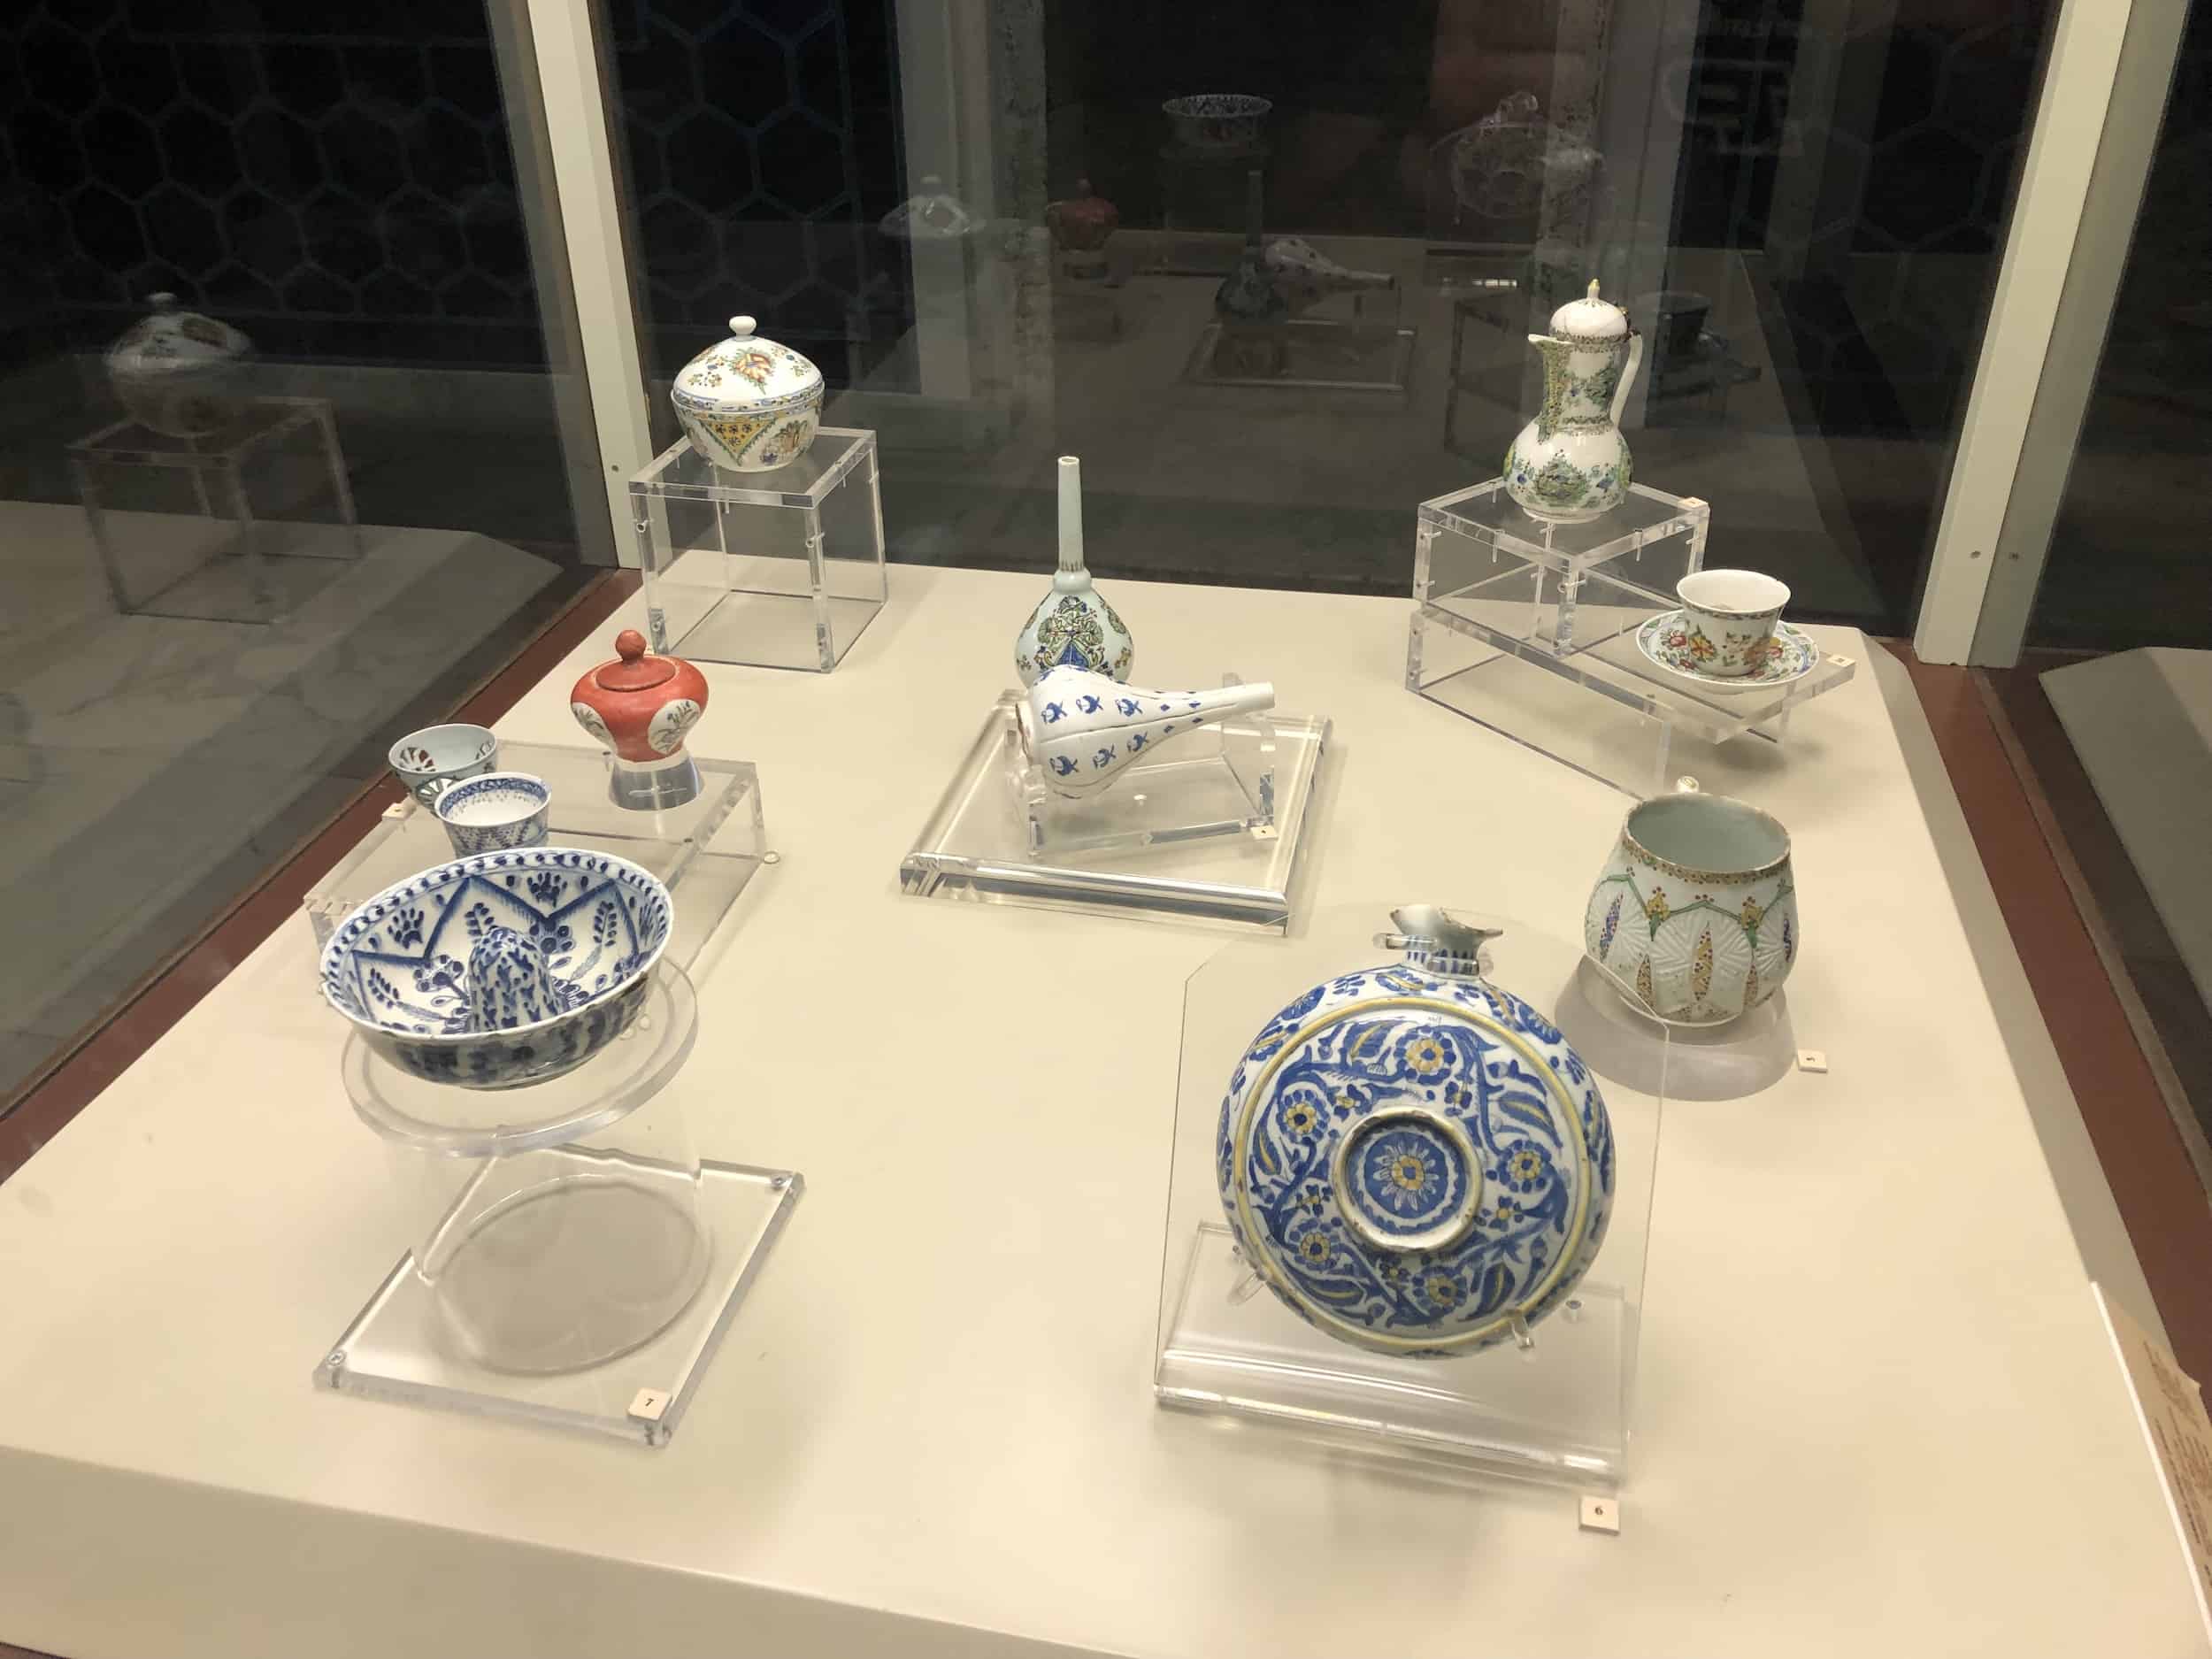 Kütahya ceramics at the Tiled Kiosk at the Istanbul Archaeology Museums in Istanbul, Turkey